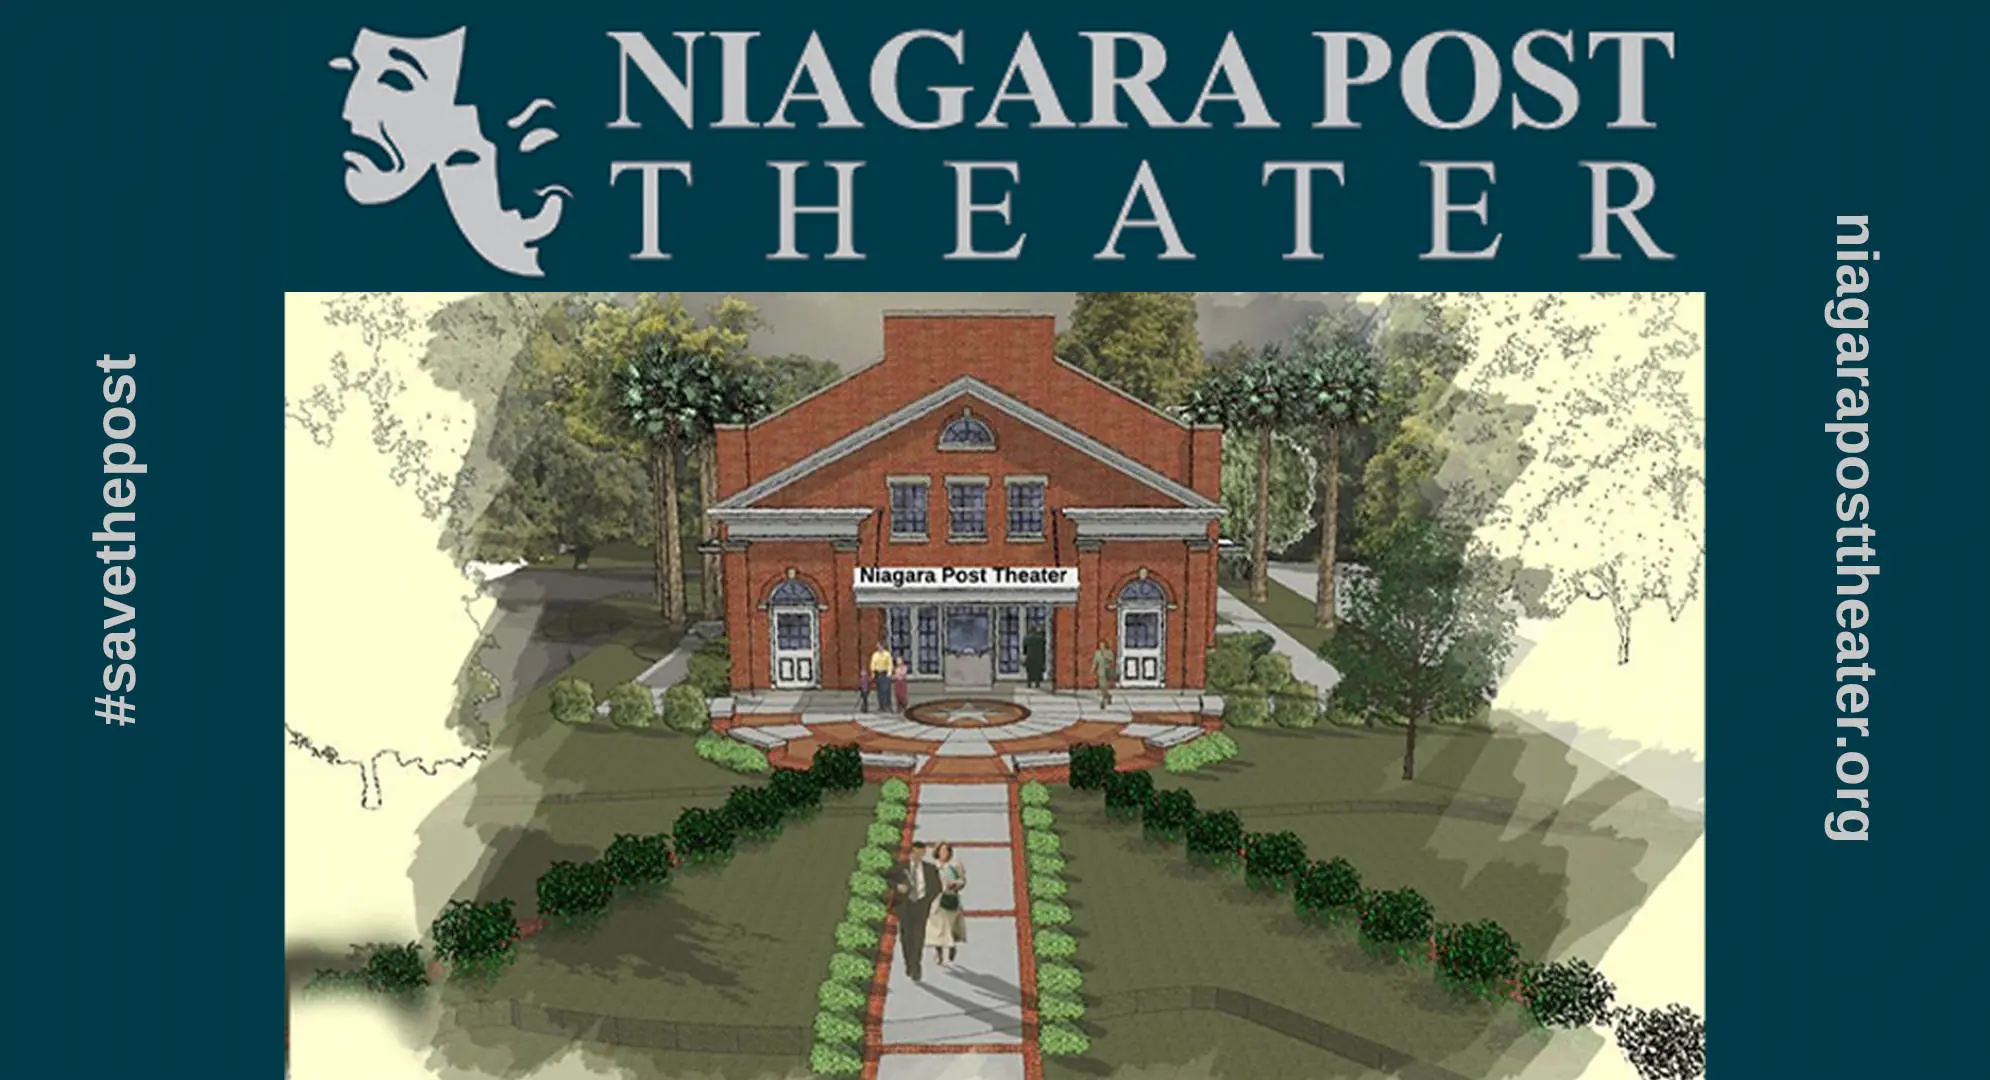 The Niagara Post Theater's Architectural Vision